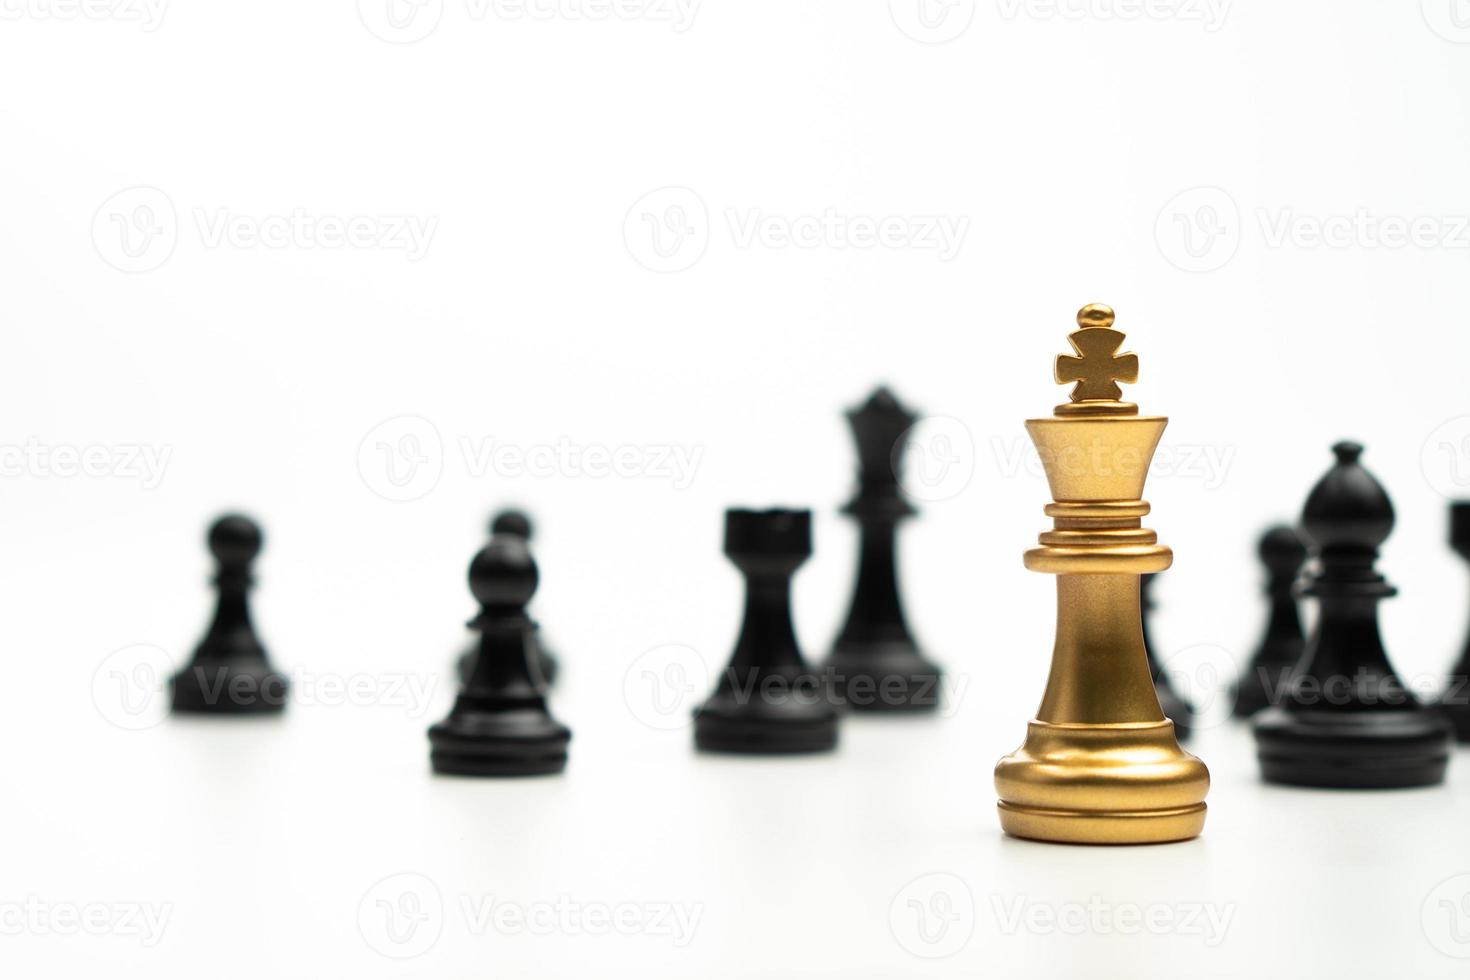 Golden Chess King standing to Be around of other chess, Concept of a leader must have courage and challenge in the competition, leadership and business vision for a win in business games photo